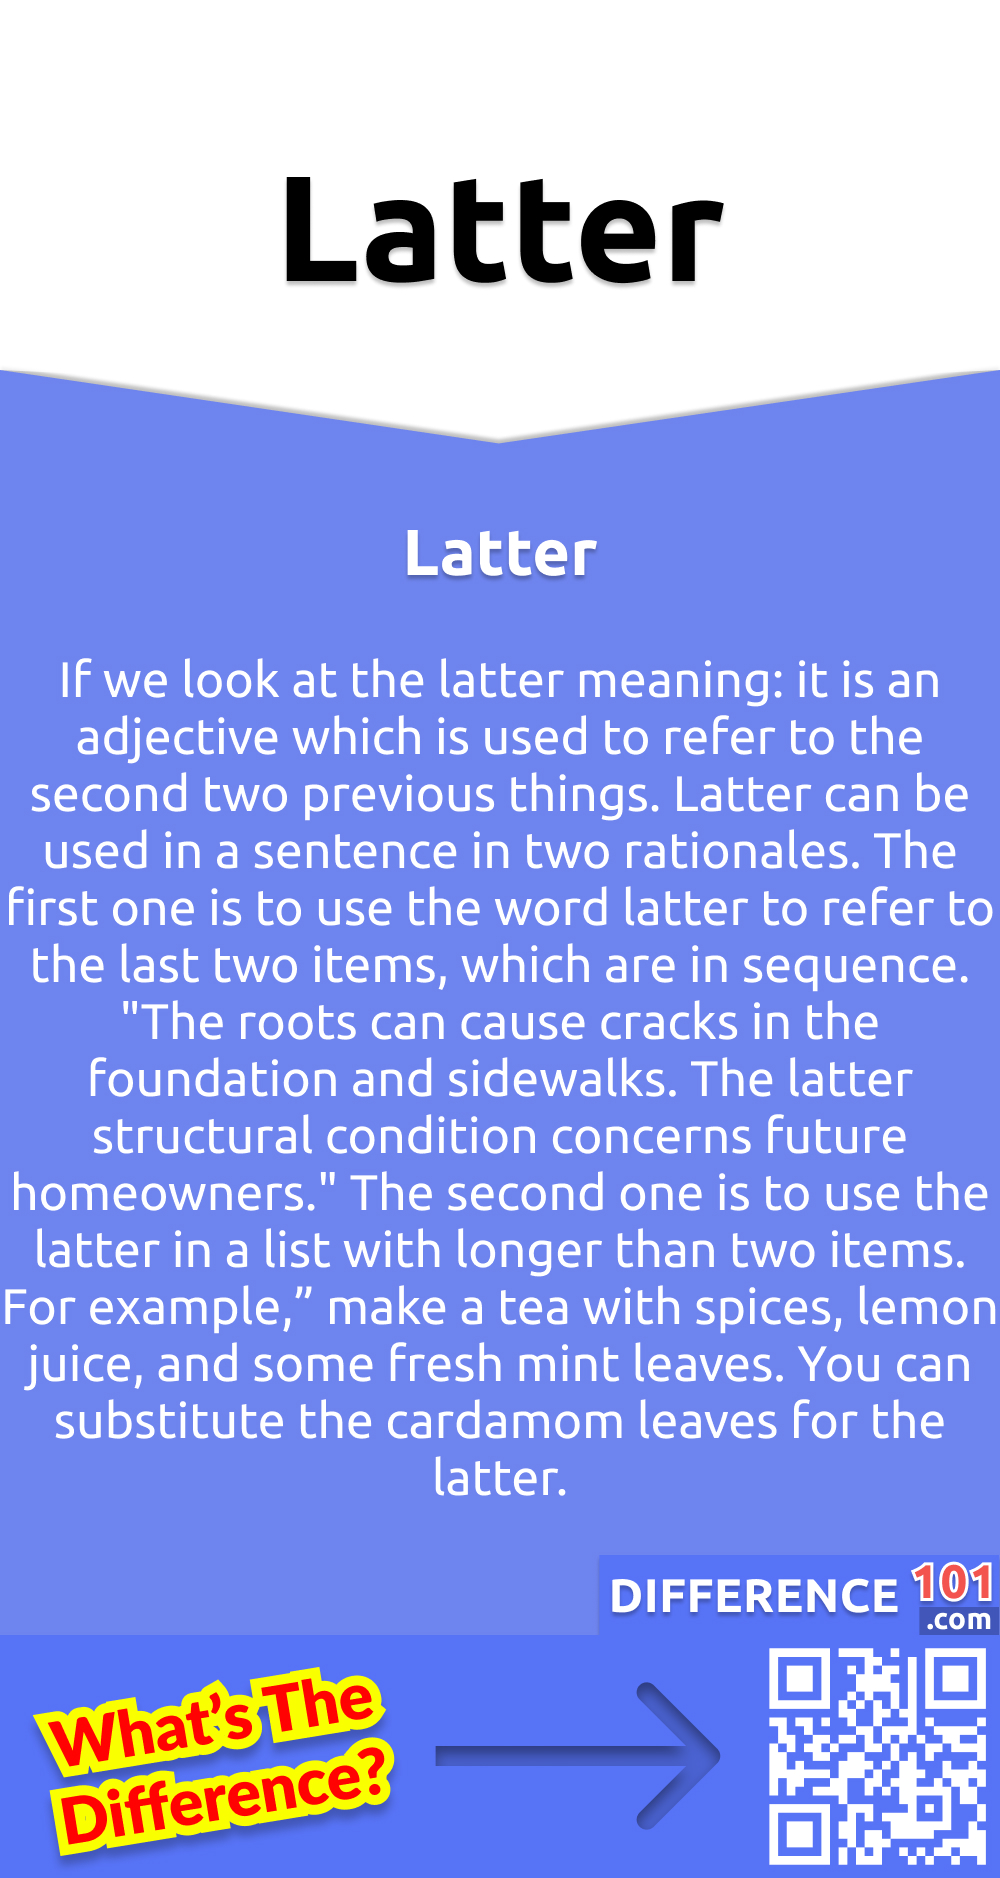 What Is Latter? If we look at the latter meaning: it is an adjective which is used to refer to the second two previous things. Latter can be used in a sentence in two rationales. The first one is to use the word latter to refer to the last two items, which are in sequence. "The roots can cause cracks in the foundation and sidewalks. The latter structural condition concerns future homeowners." The second one is to use the latter in a list with longer than two items. For example,” make a tea with spices, lemon juice, and some fresh mint leaves. You can substitute the cardamom leaves for the latter.